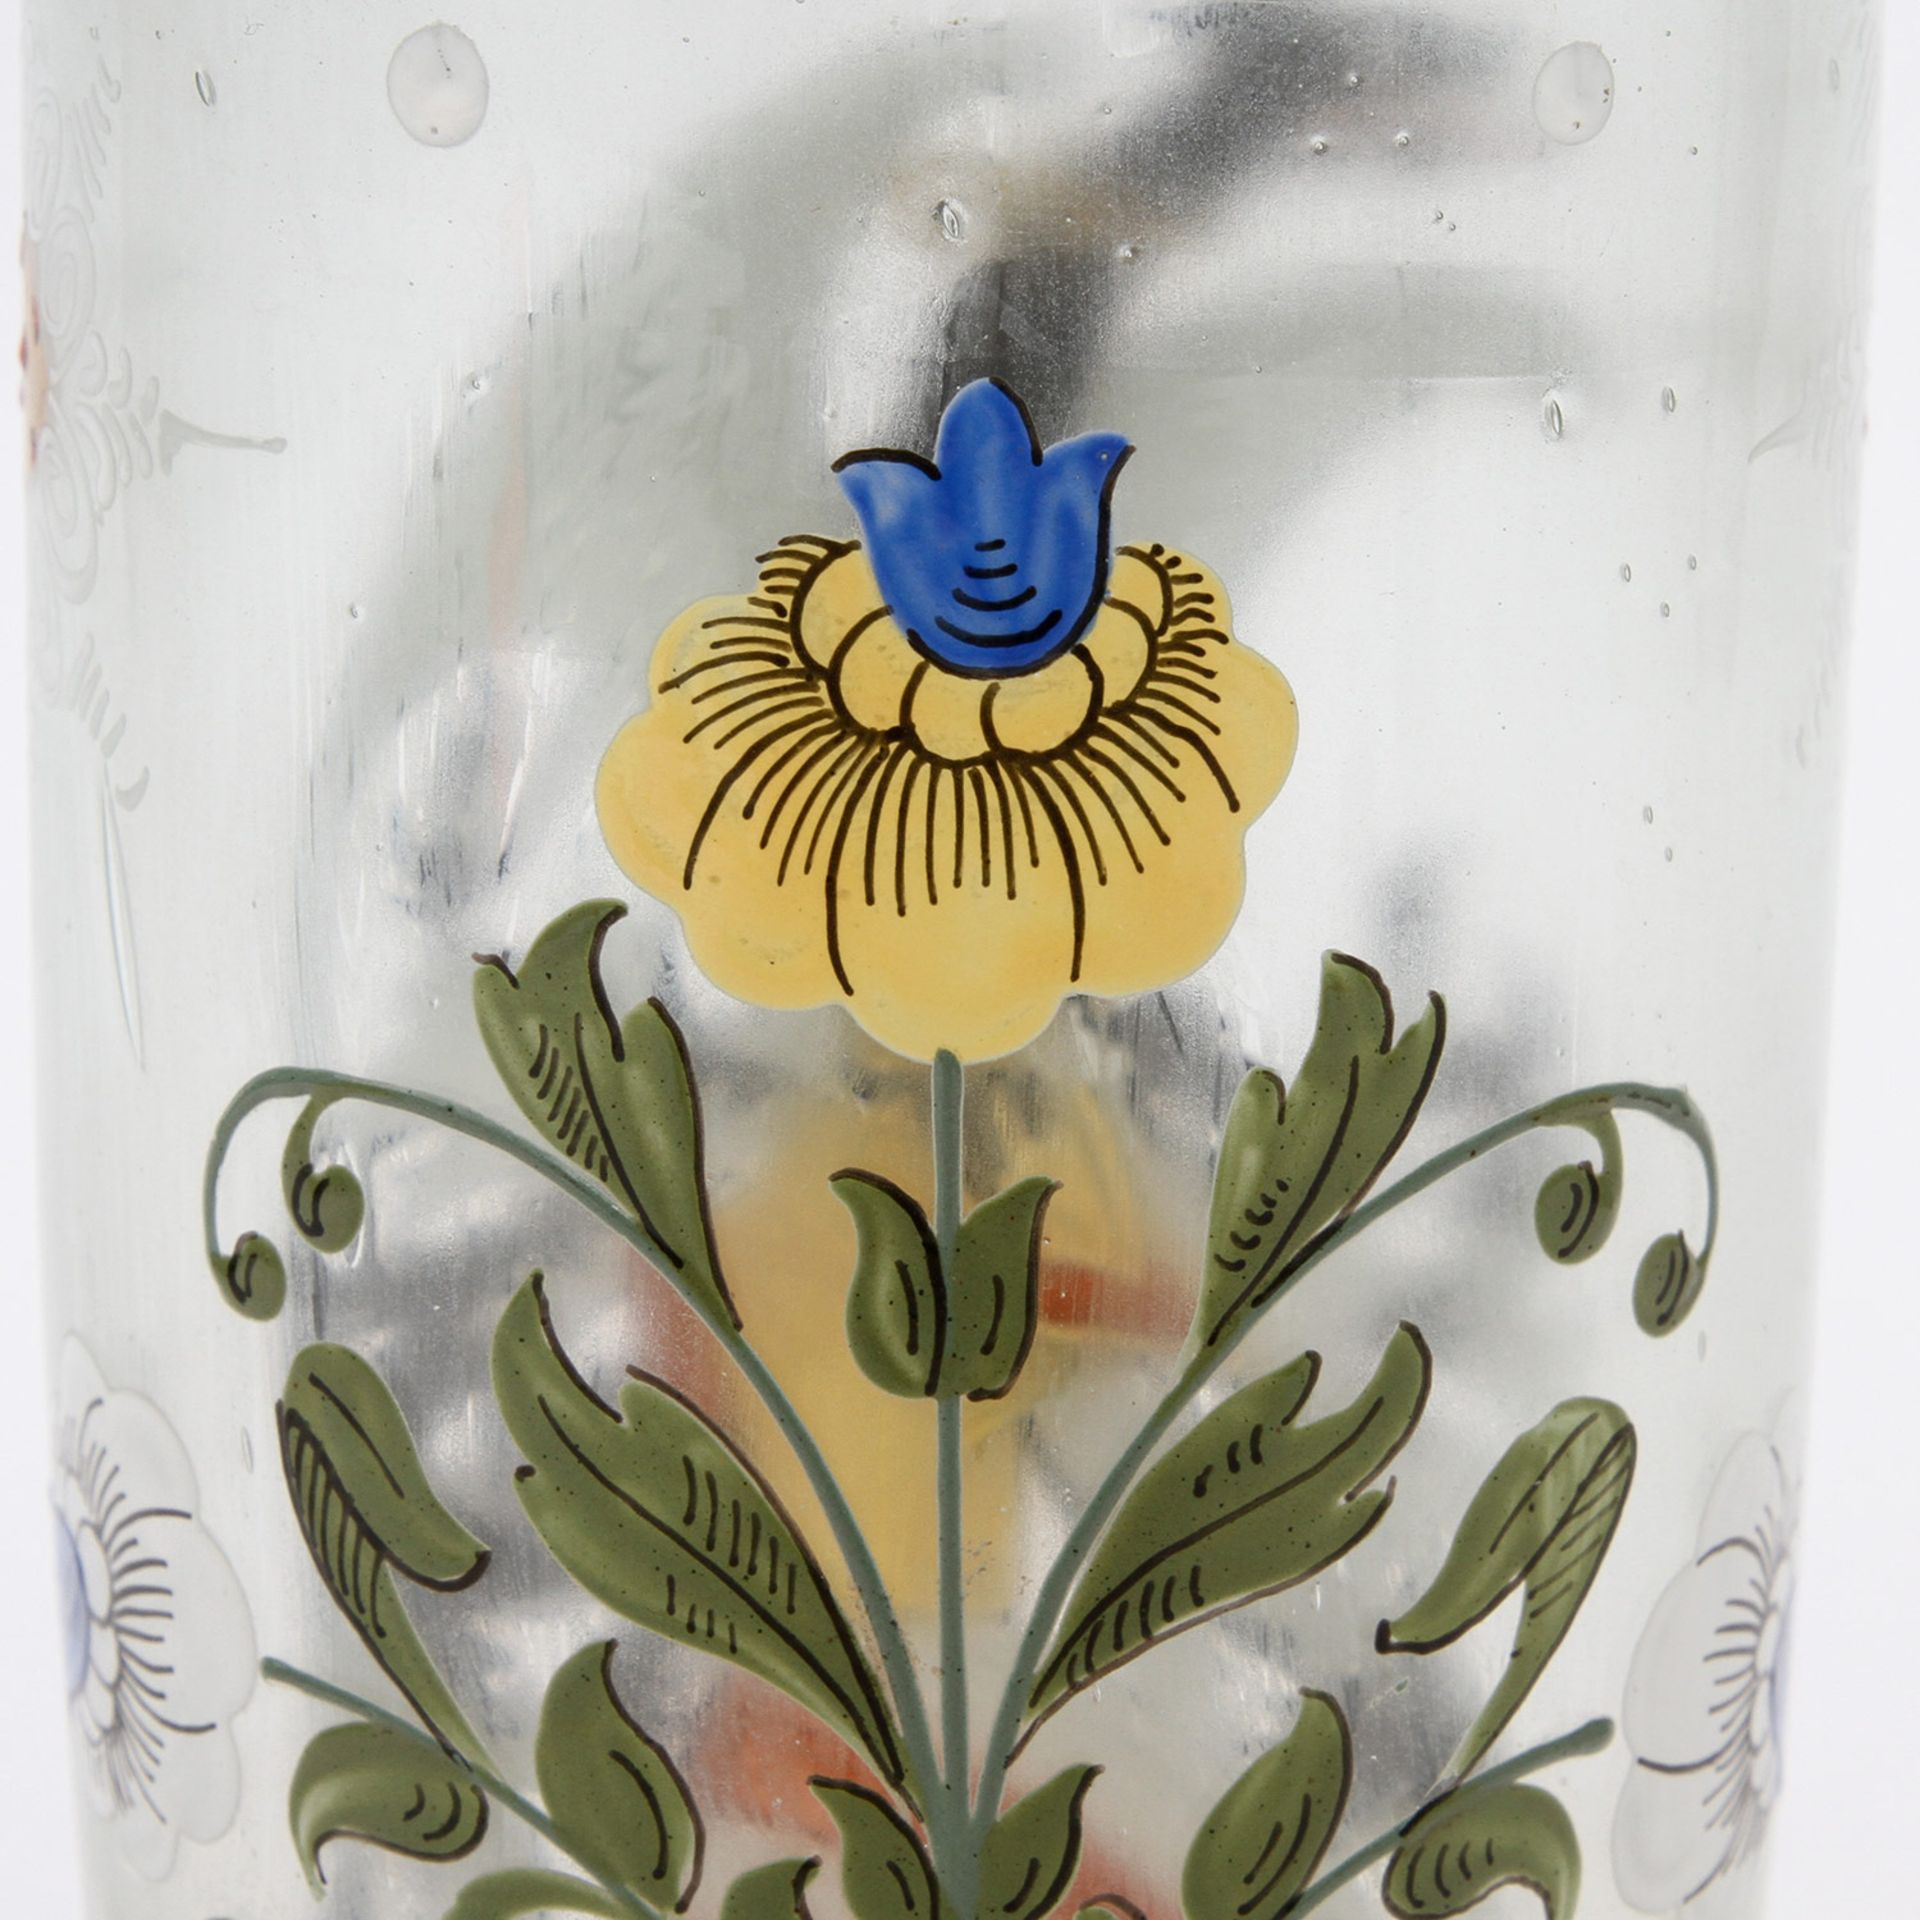 WAPPEN-BECHER Ende 19.Jh.,farbloses Glas mit farbiger Emailbemalung, gold staffiert, H: 22,5 cm. - Image 5 of 7